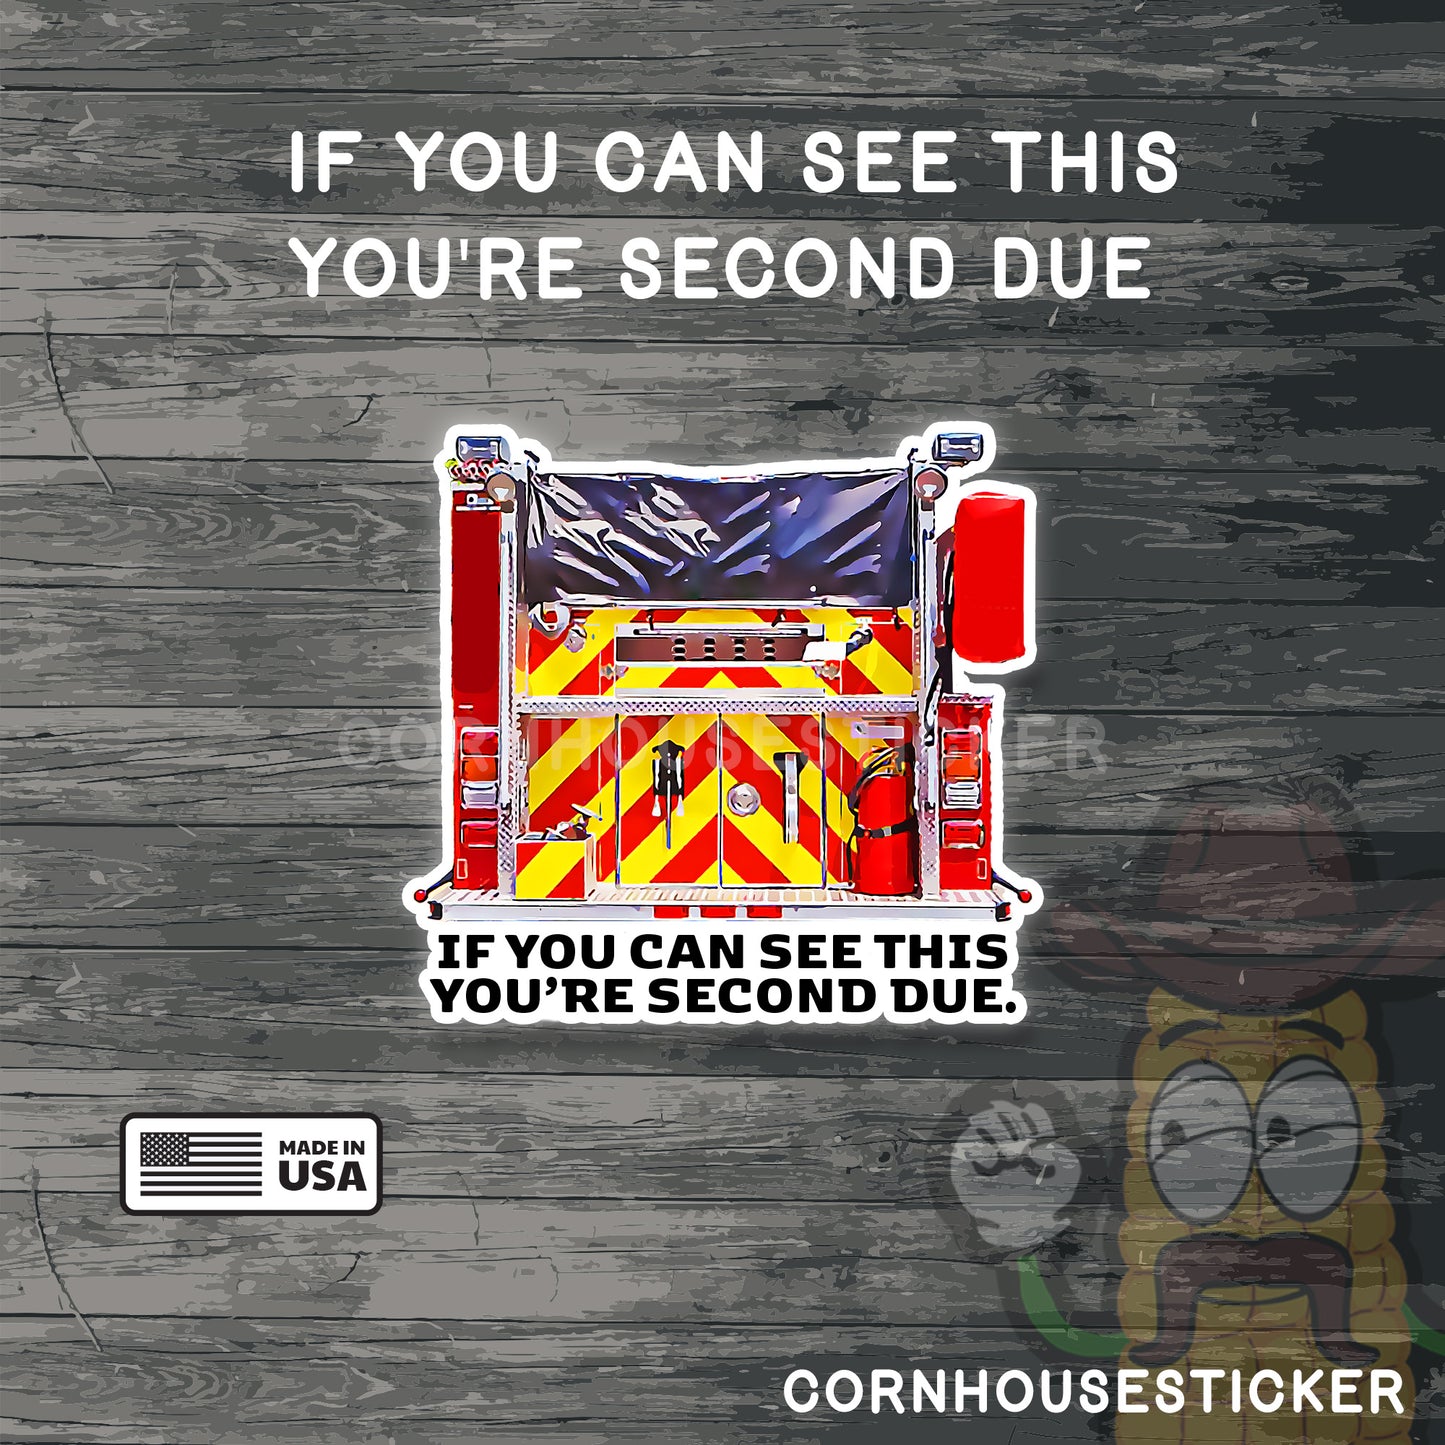 If you can see this you're second due. | Firefighter stickers